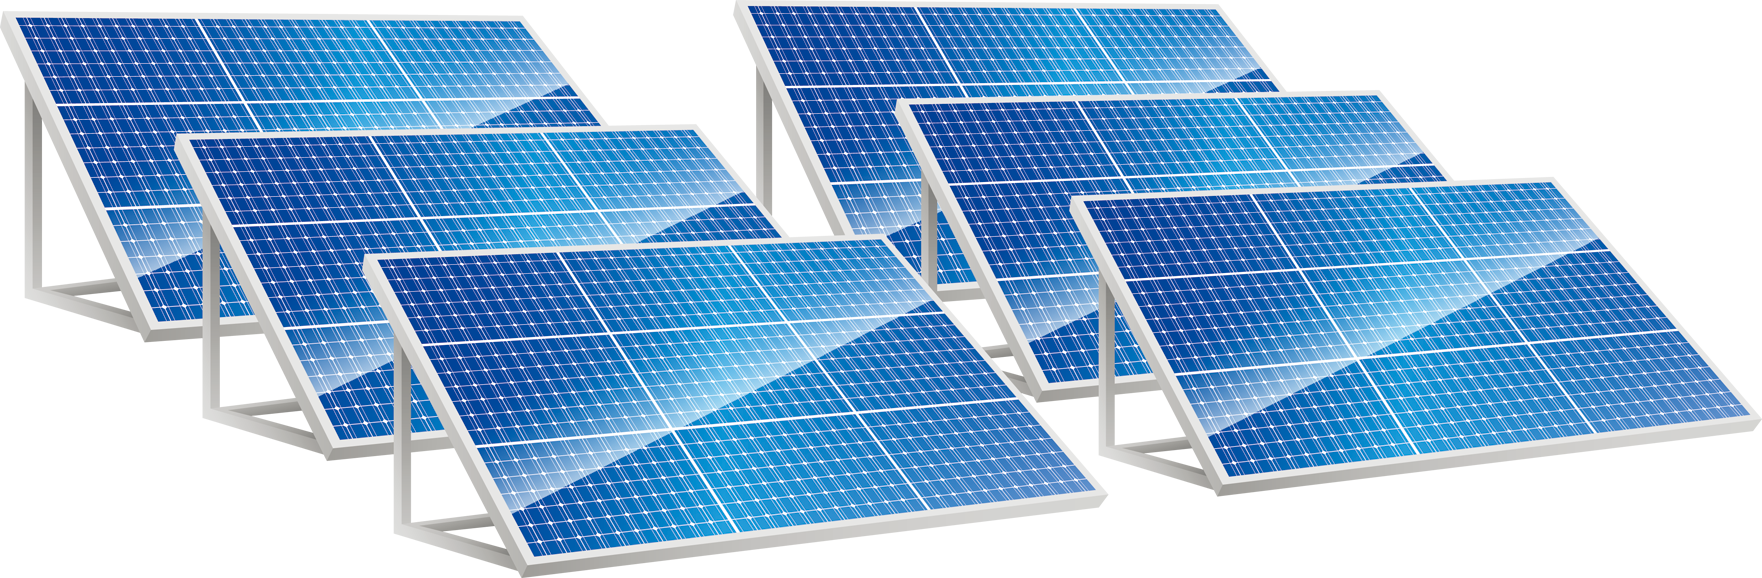 Solar Power PNG Image HD | PNG All